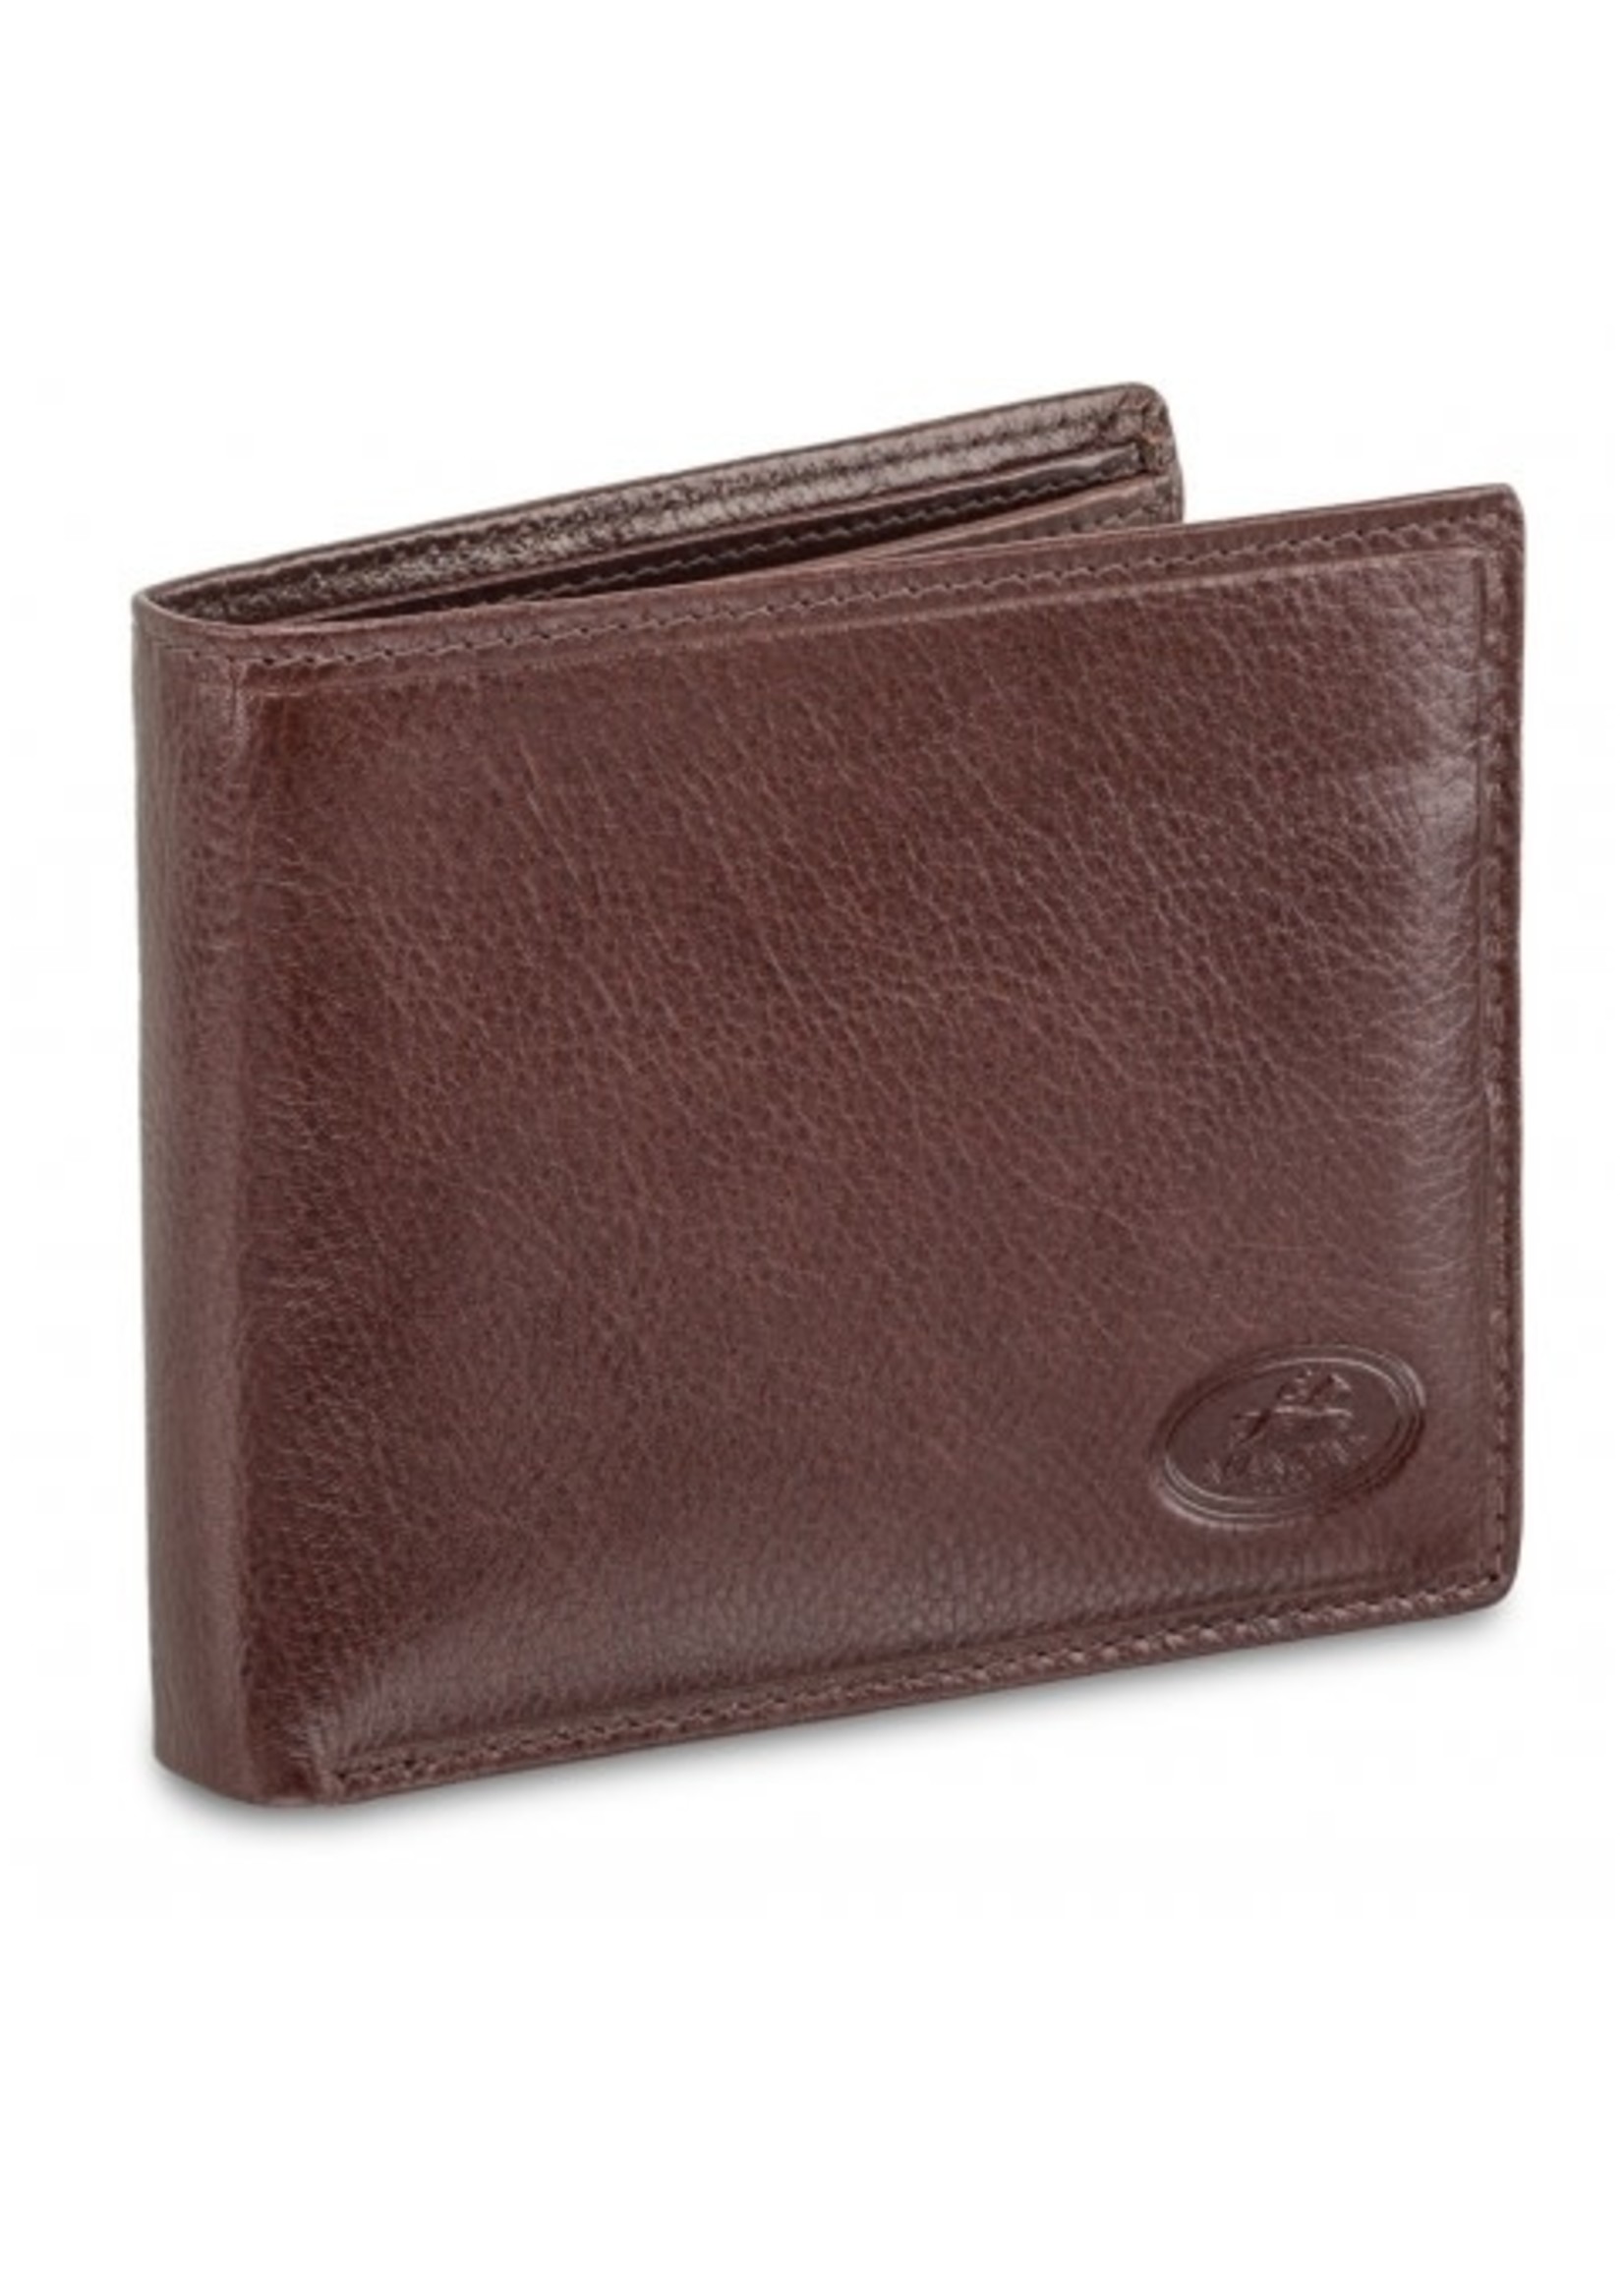 Mancini Men`s RFID Secure Wallet with Removable Passcase and Coin Pocket - Brown